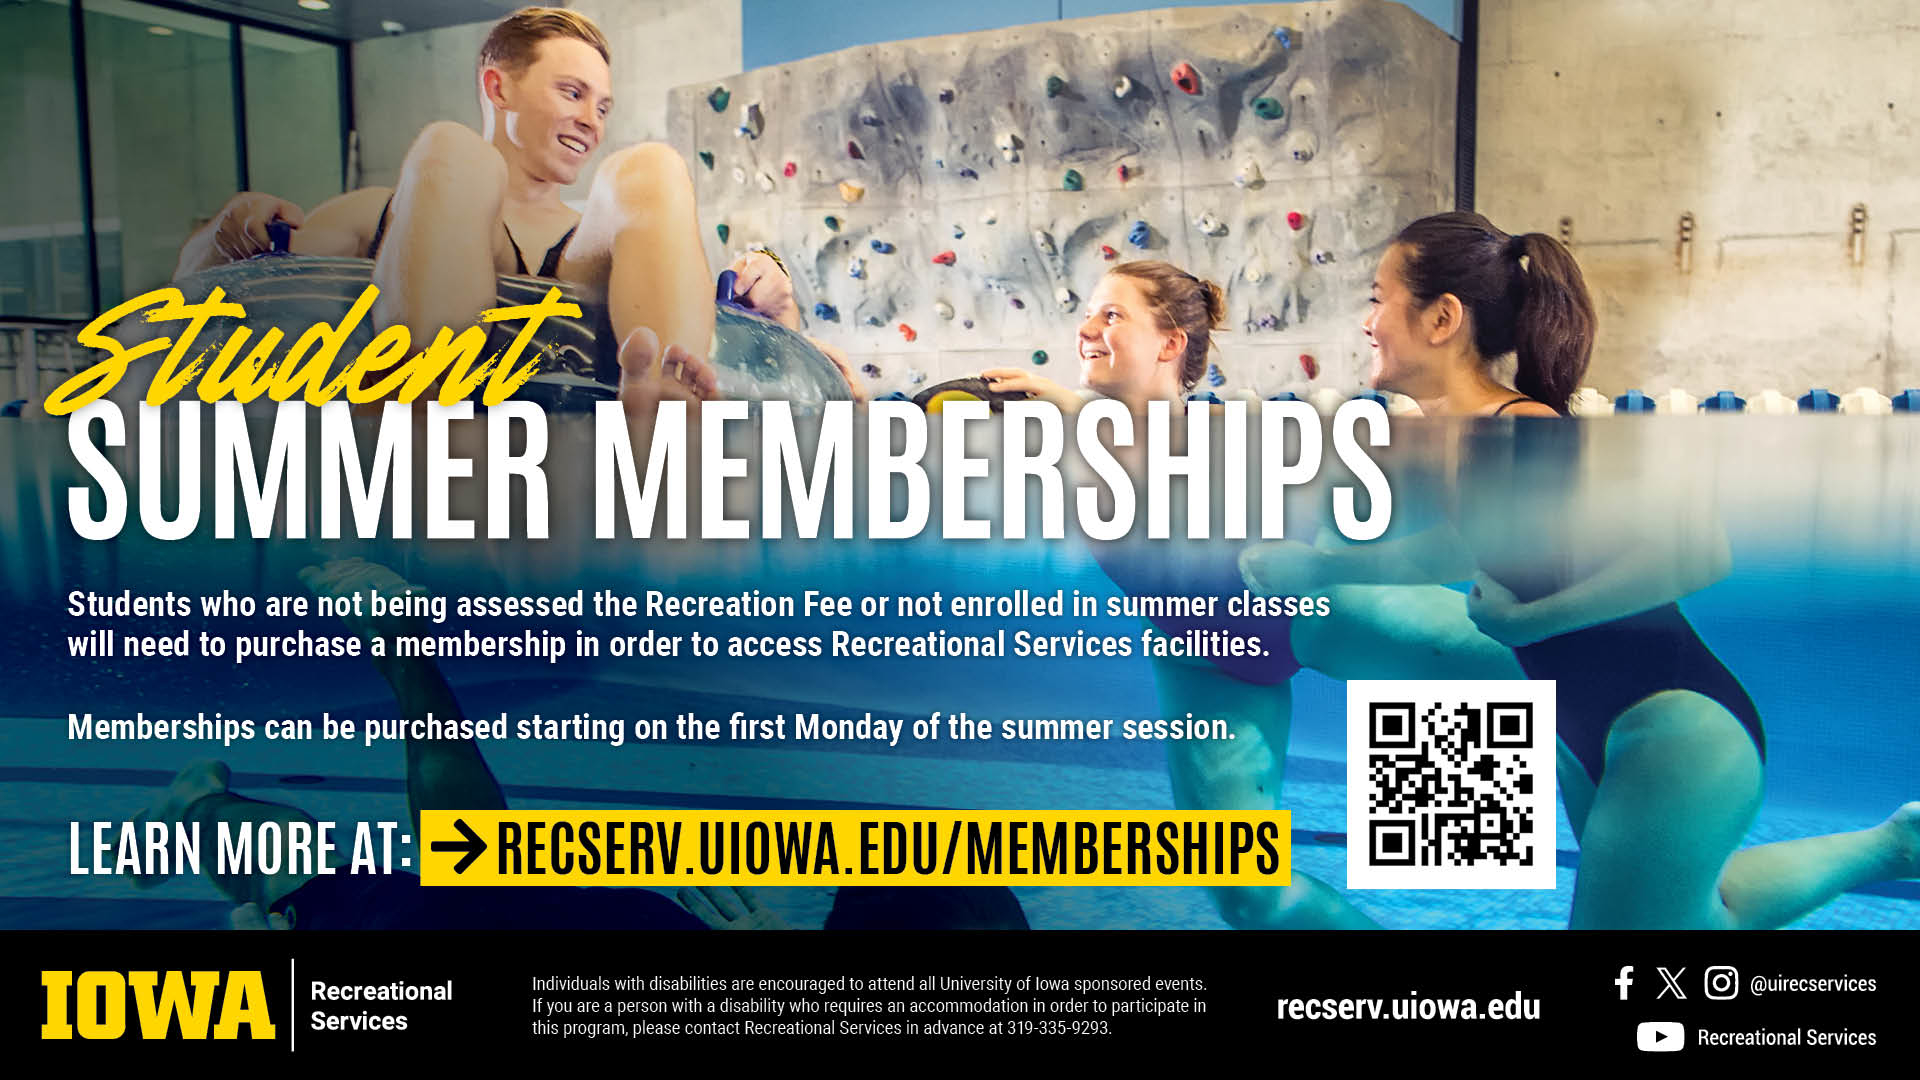 Summer memberships."Students who are not being assessed the Recreation Fee or not enrolled in summer classes will need to purchase a membership in order to access Recreational Services facilities."  Sale begins the first Monday of summer semester. learn more at recserv.uiowa.edu/memberships